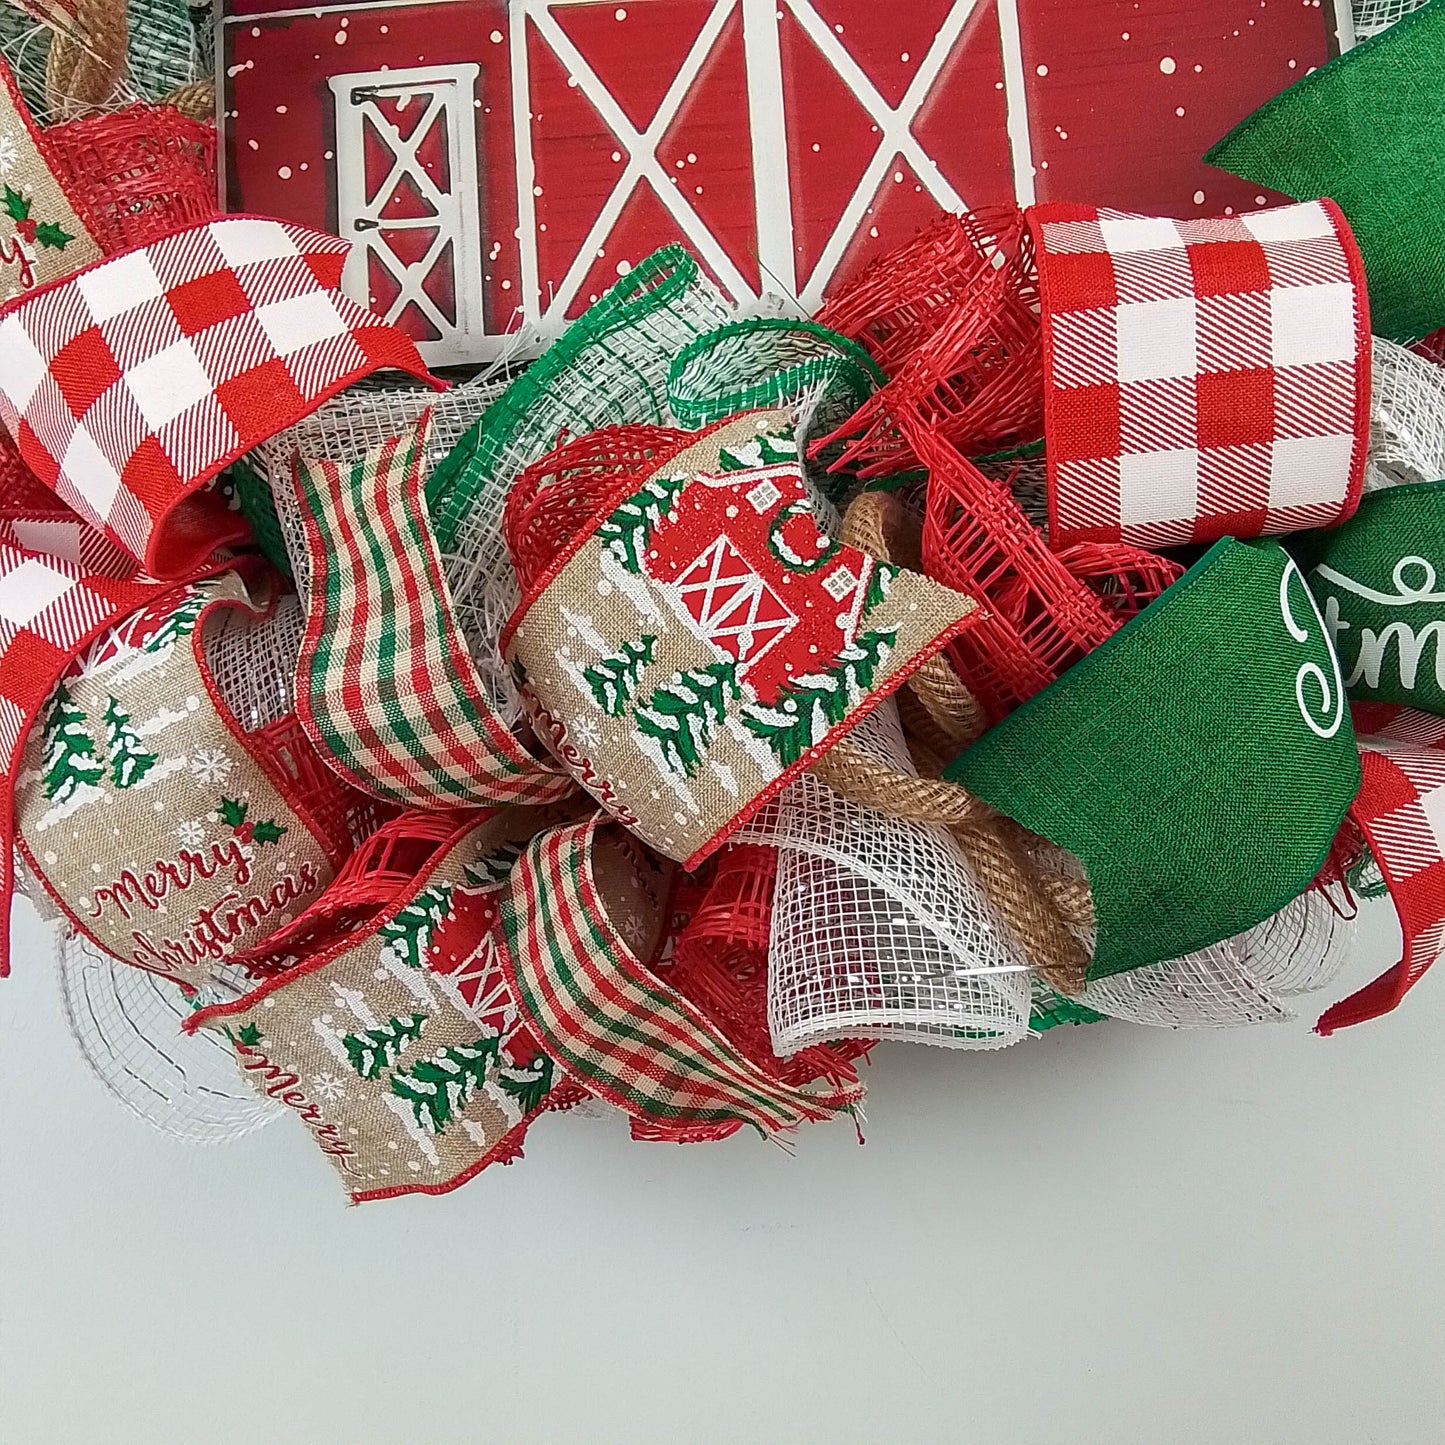 Winter Barn Christmas Mesh Wreath - Farmhouse Outdoor Front Door Decoration - Red Green White